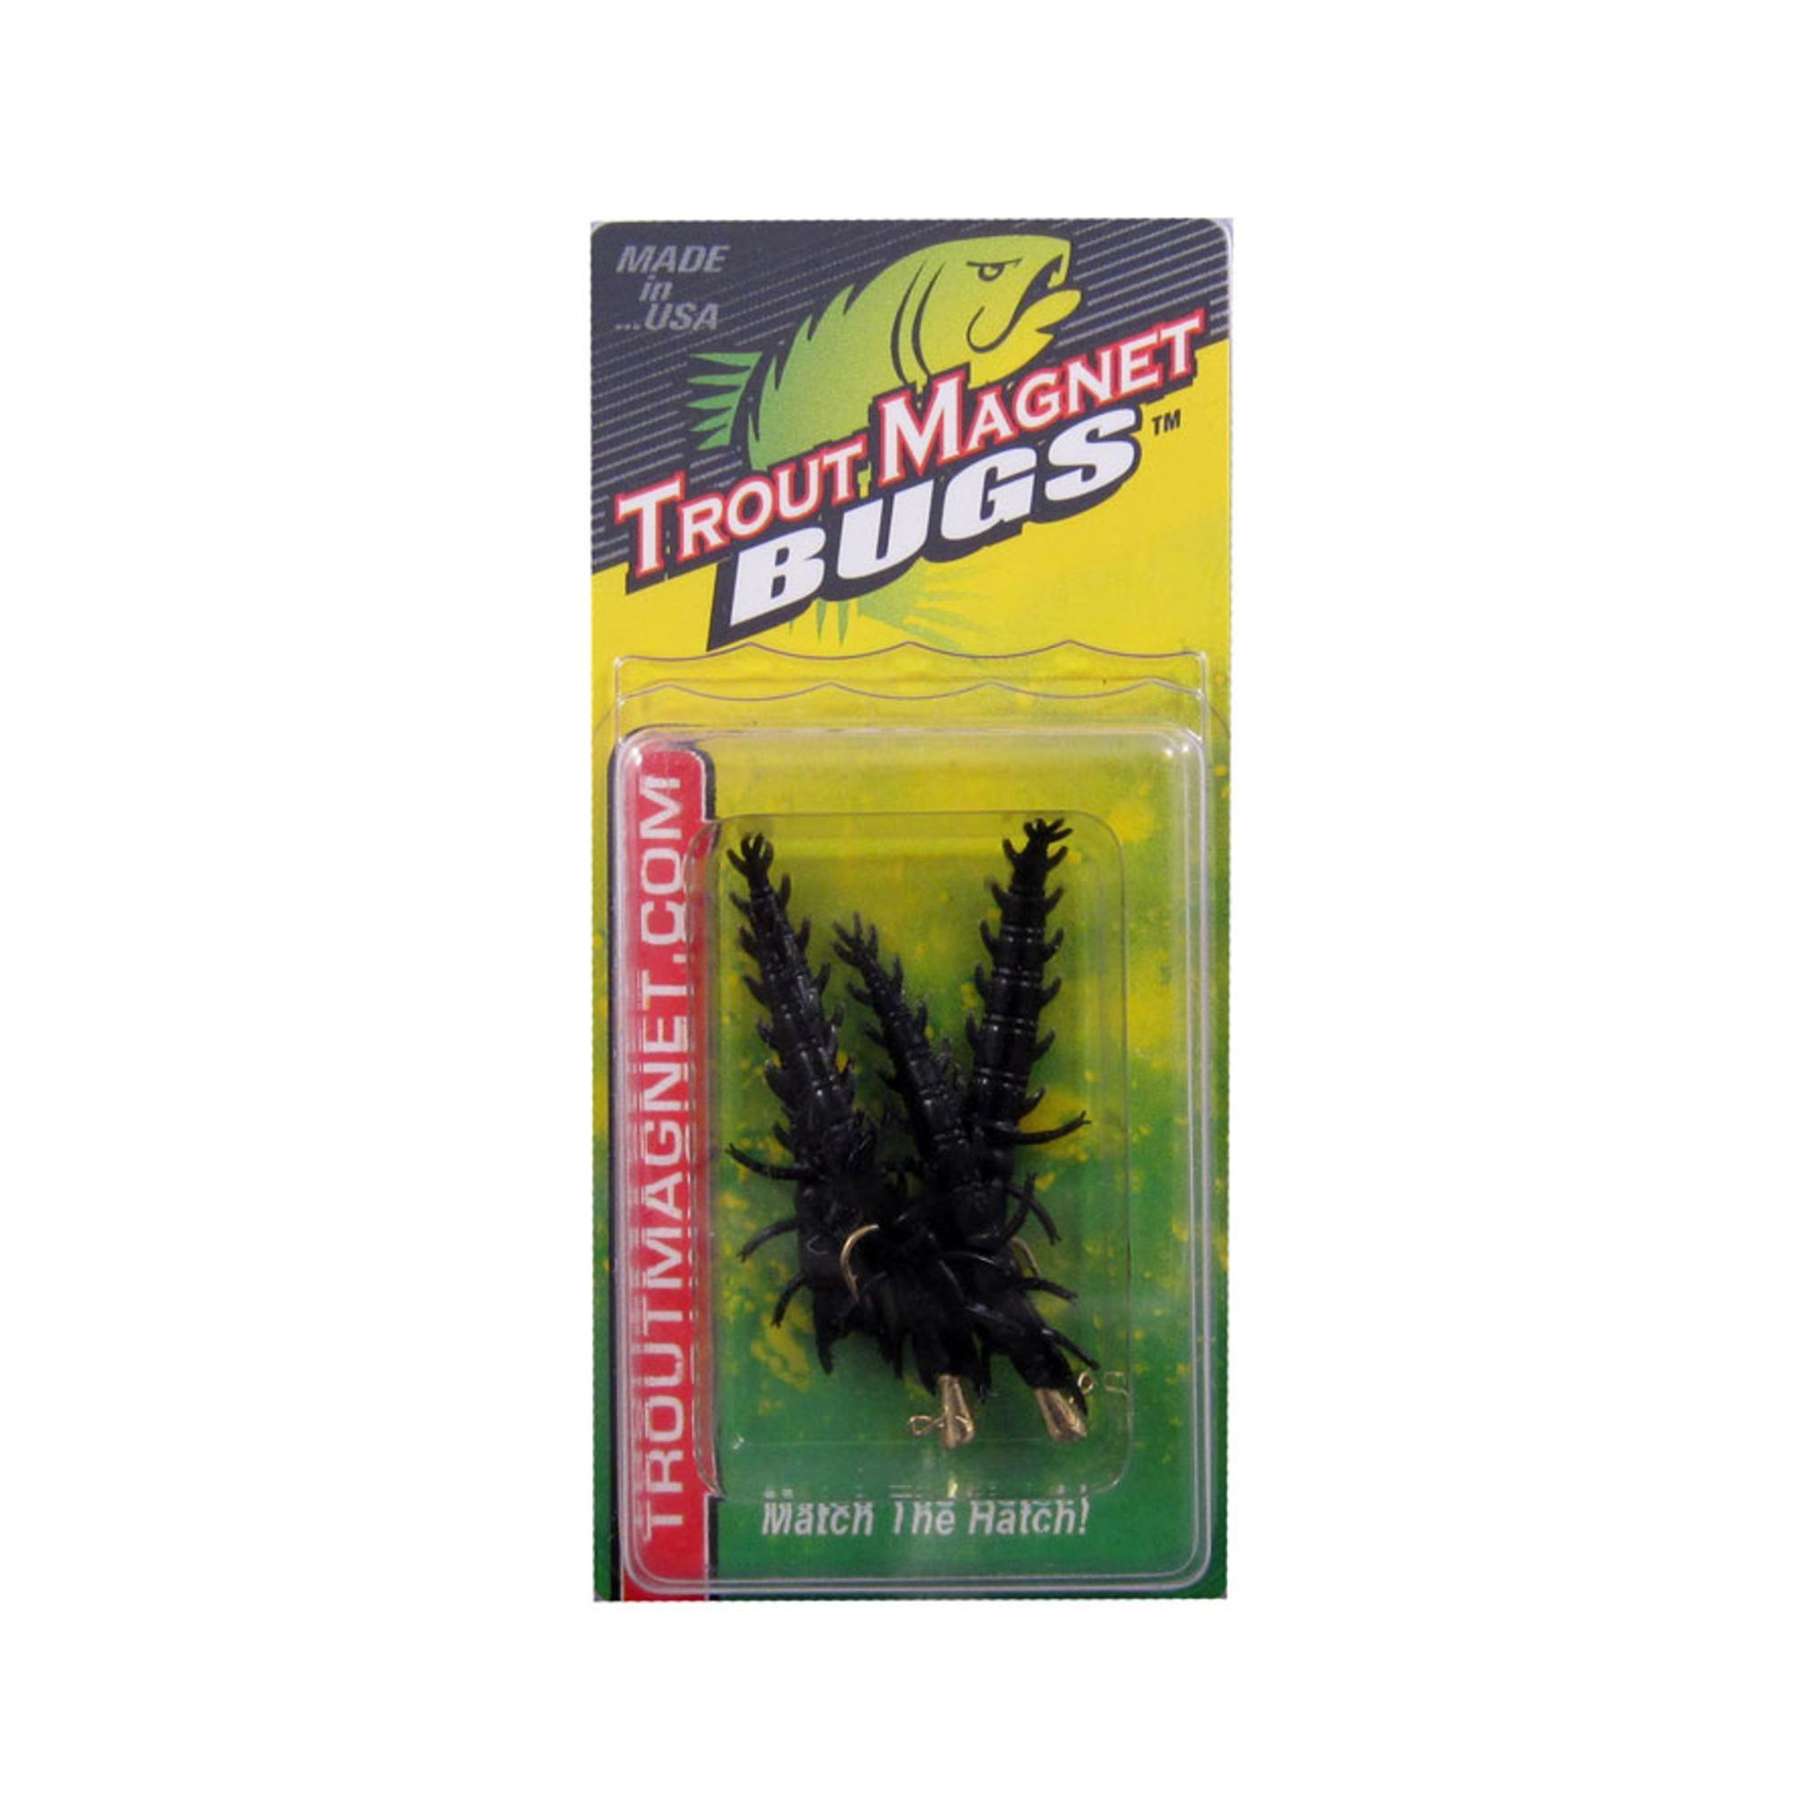 Trout Magnet Trout Bugs 6 Piece LG Helgramite - Great Addition To